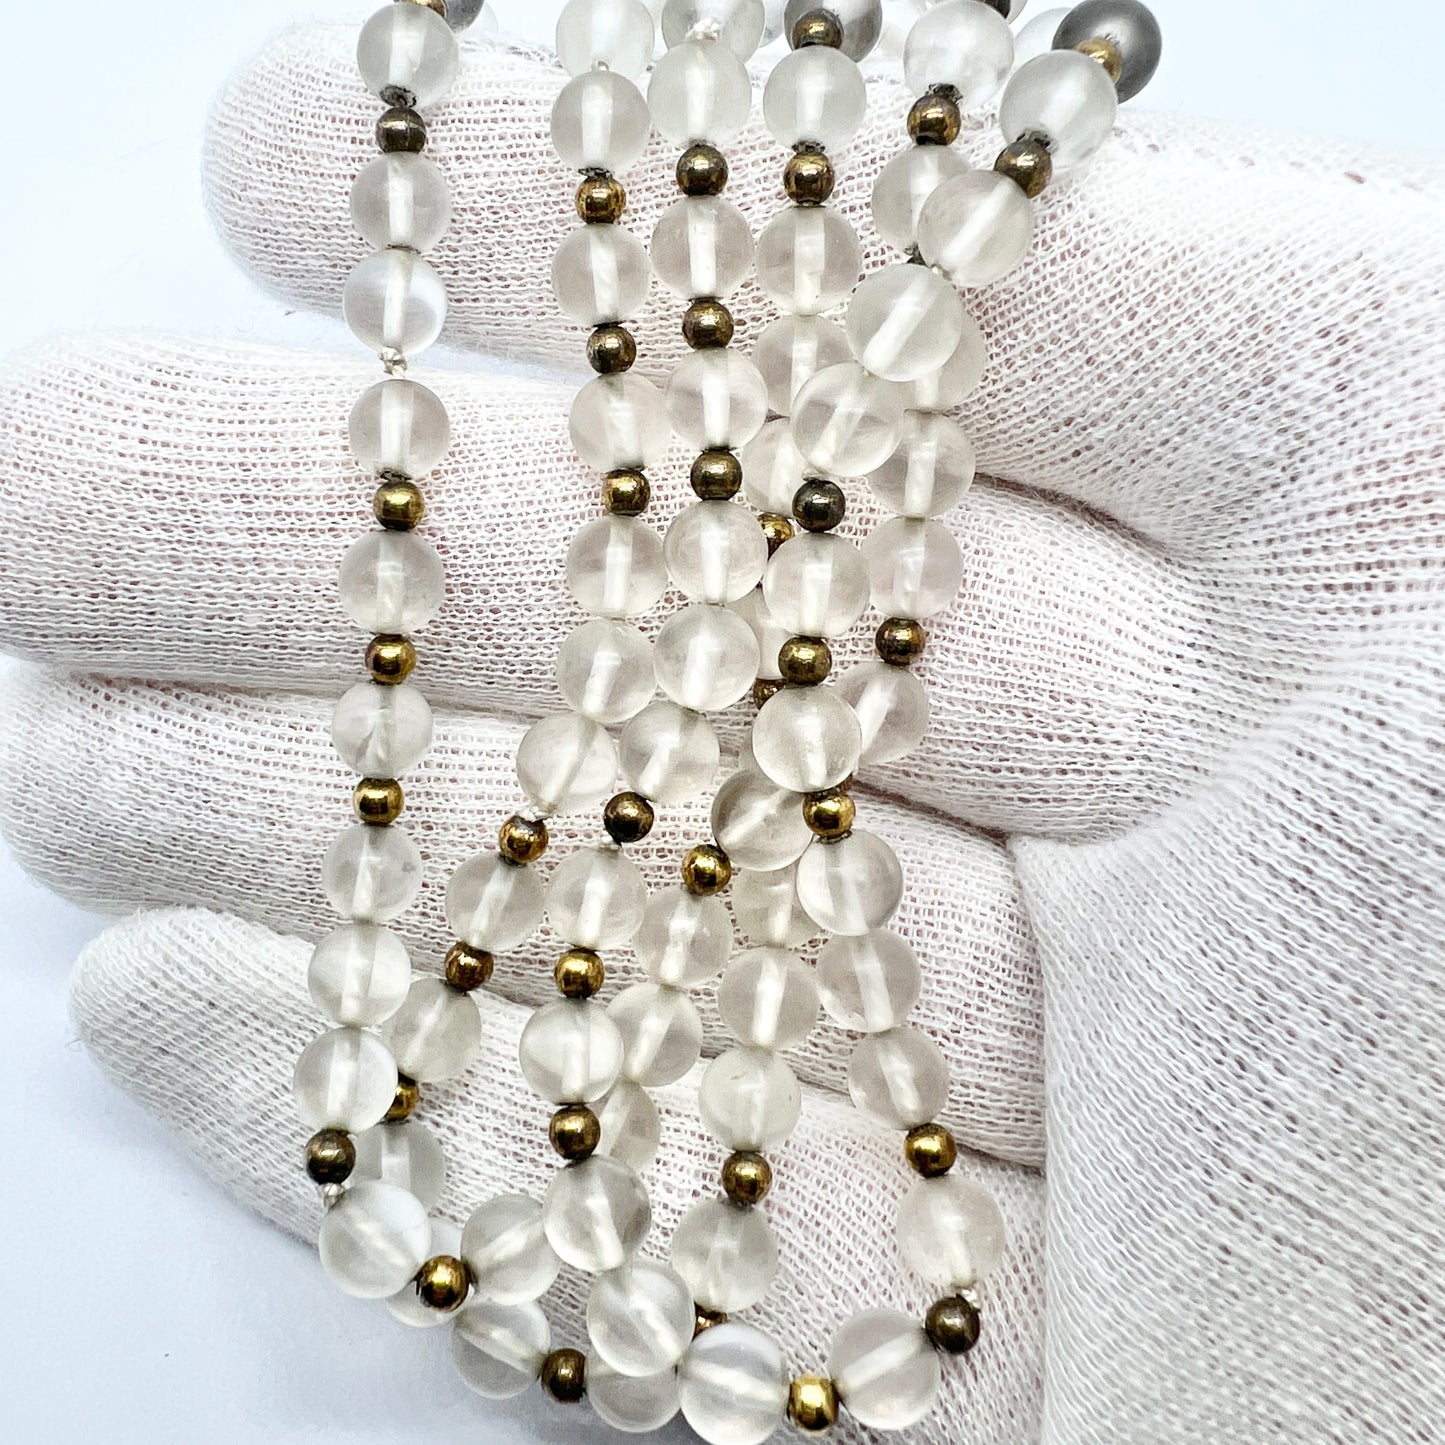 Vintage c 1950s. 835 Silver Rock Crystal Beads Necklace.